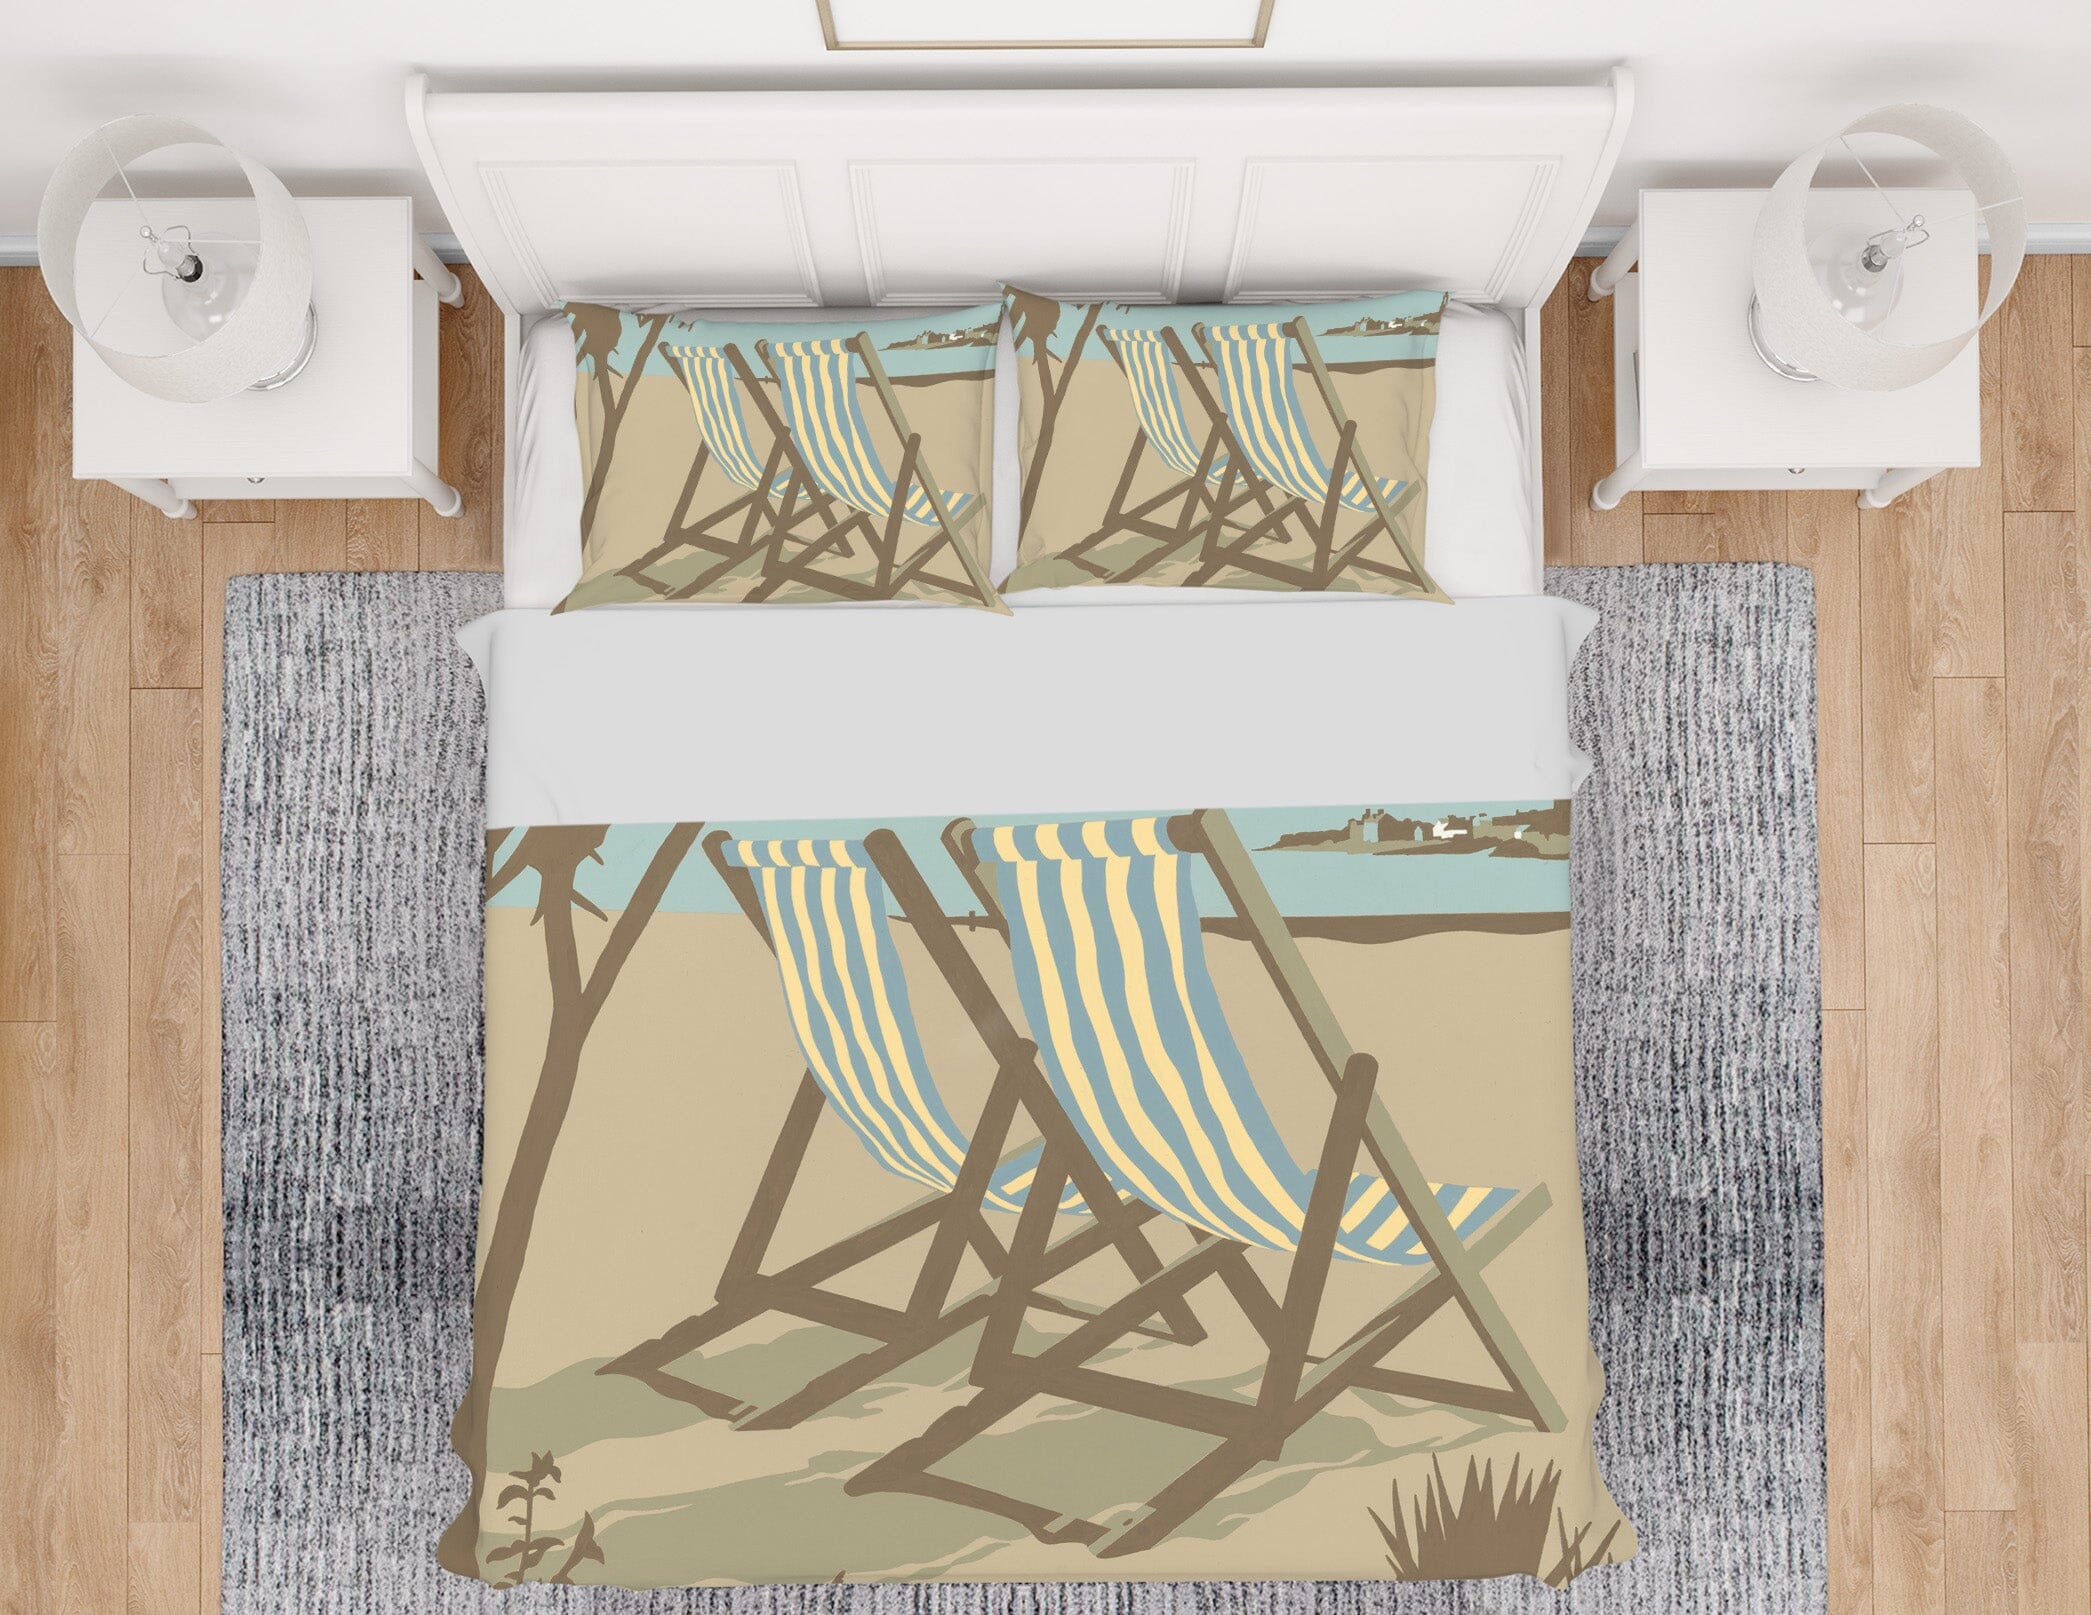 3D Swanage Deckchairs 2070 Steve Read Bedding Bed Pillowcases Quilt Quiet Covers AJ Creativity Home 